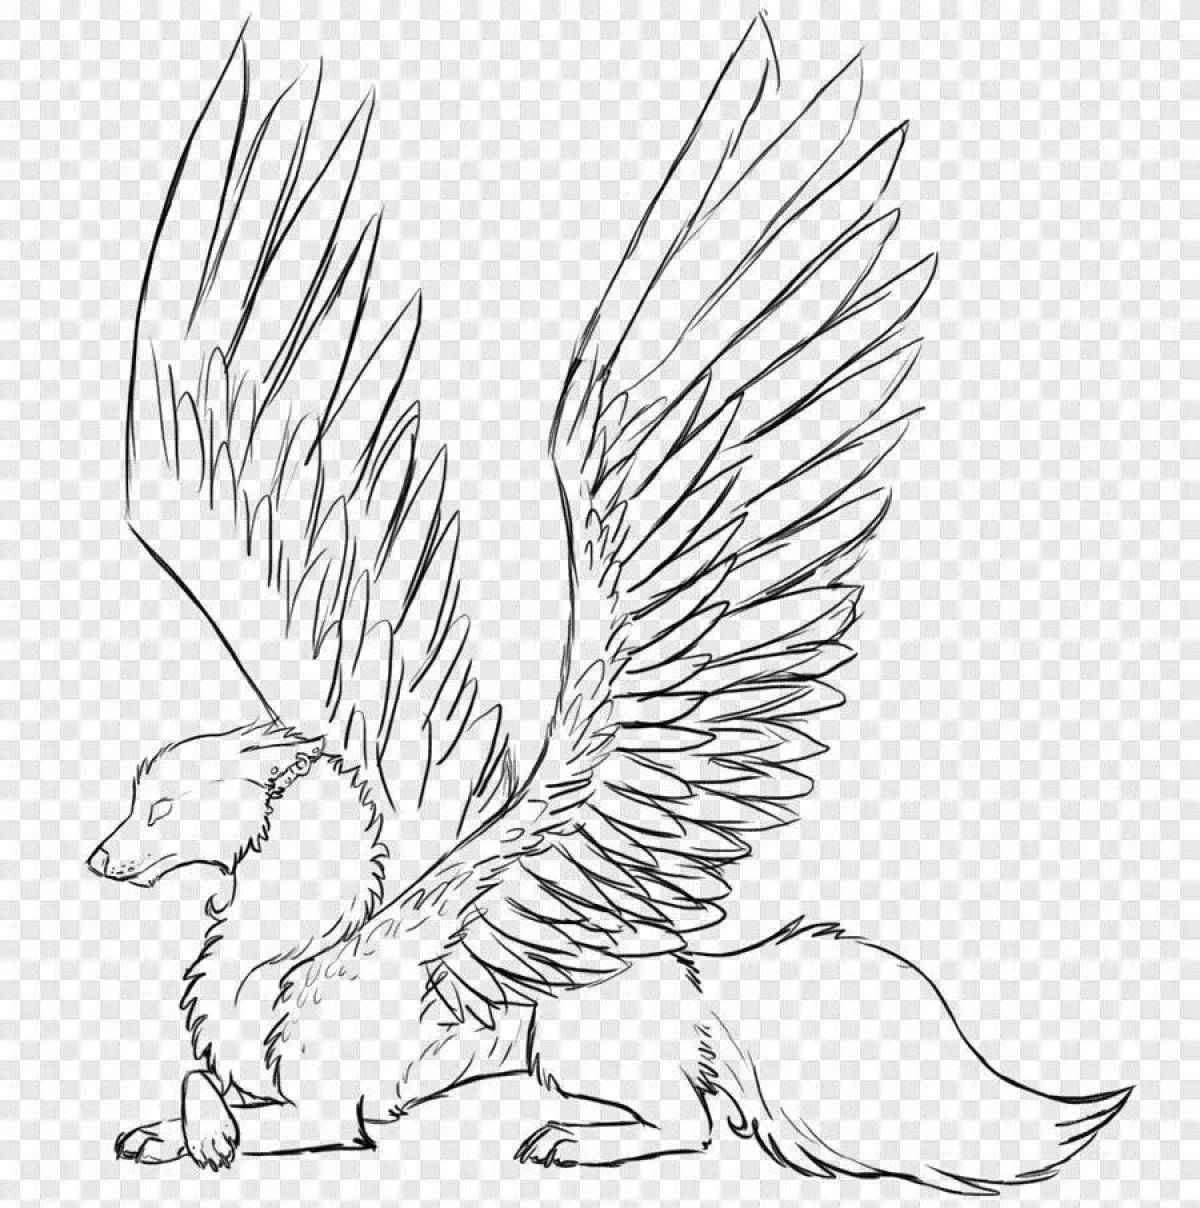 Playful coloring dog with wings